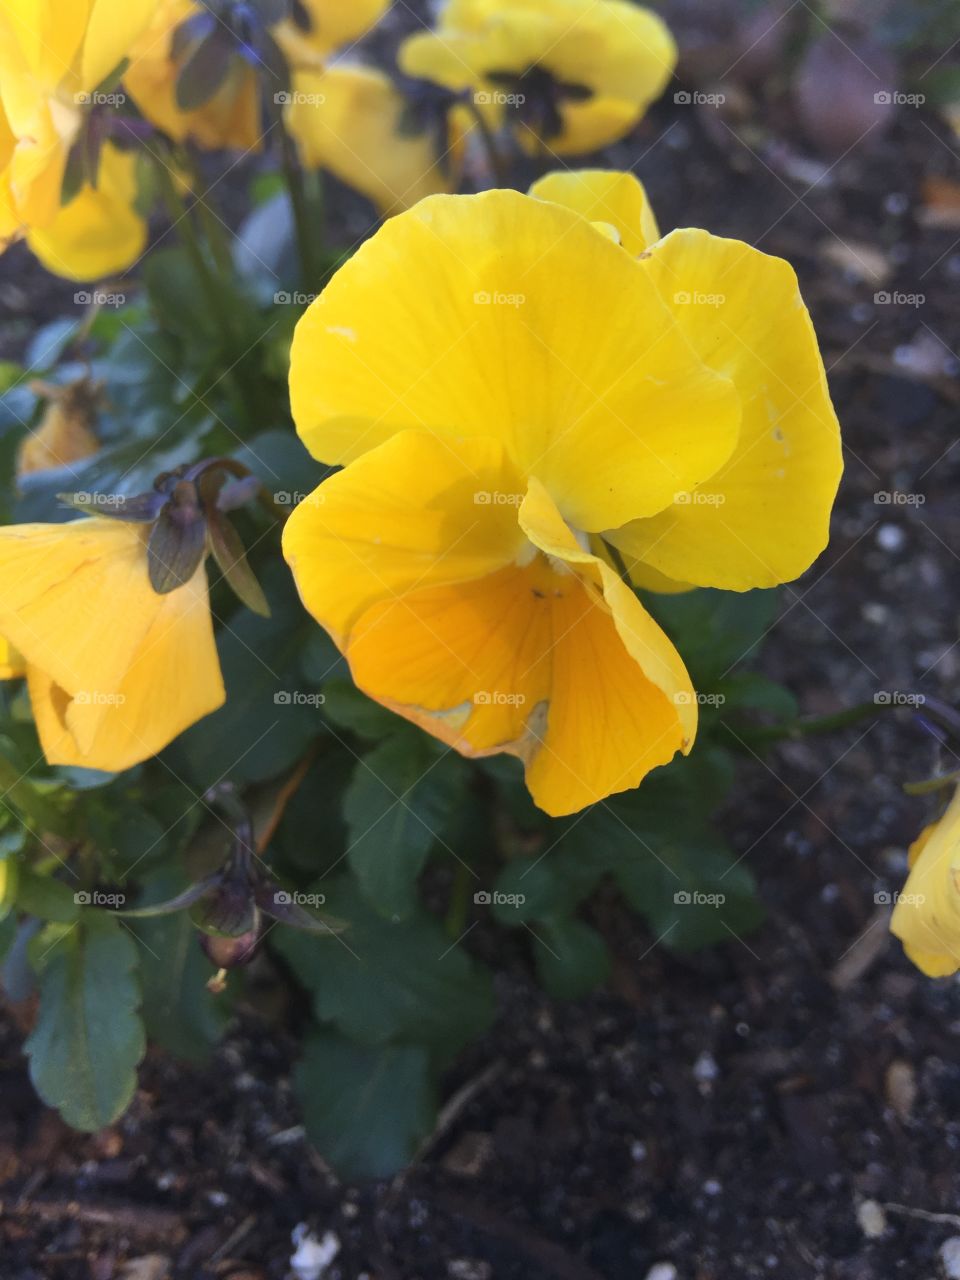 Shot of a gentle yellow flower against the background of hardening mulch and lively leafs.